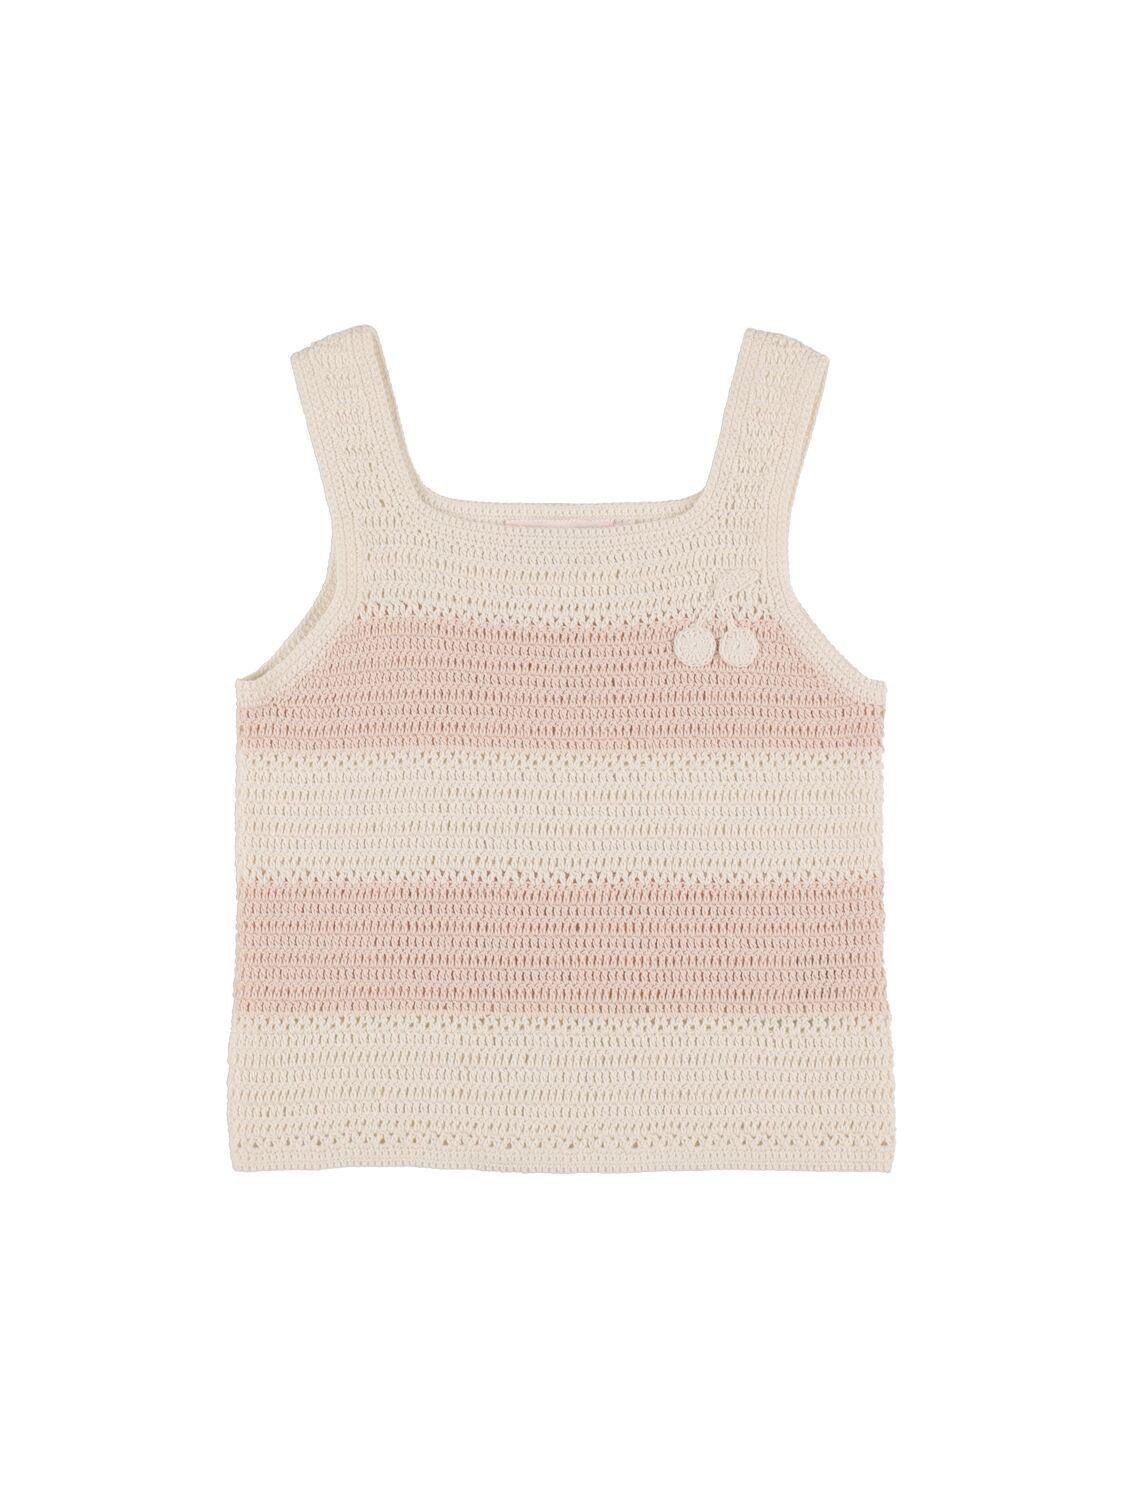 Hand-crocheted Cotton Crop Top by BONPOINT